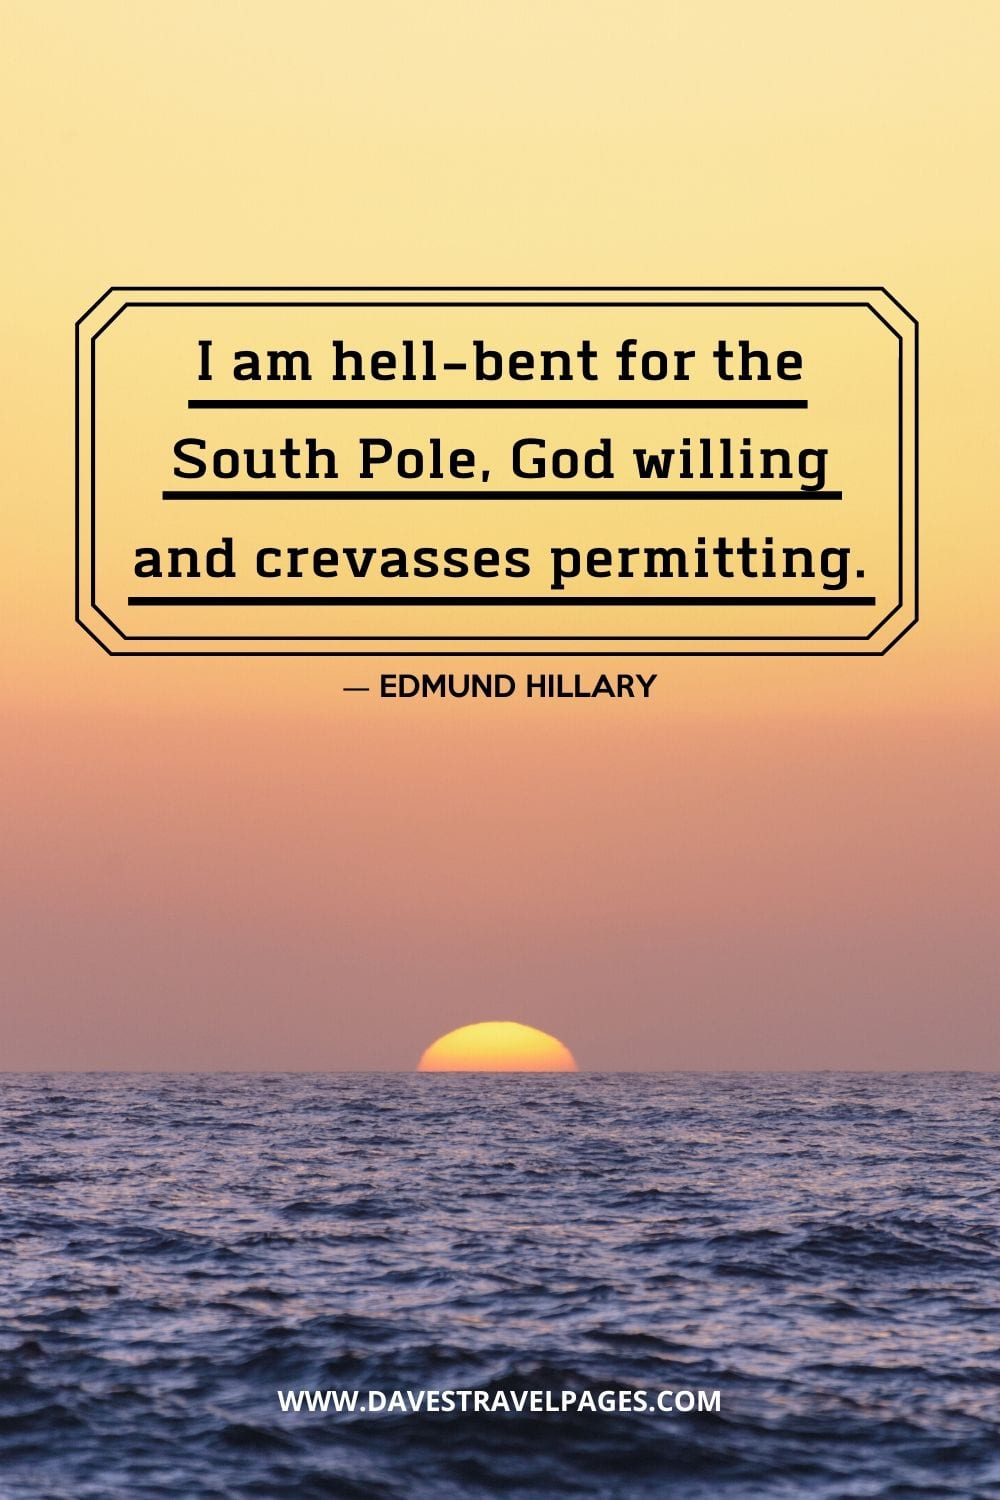 Quotes on Adventure: "I am hell-bent for the South Pole, God willing and crevasses permitting."